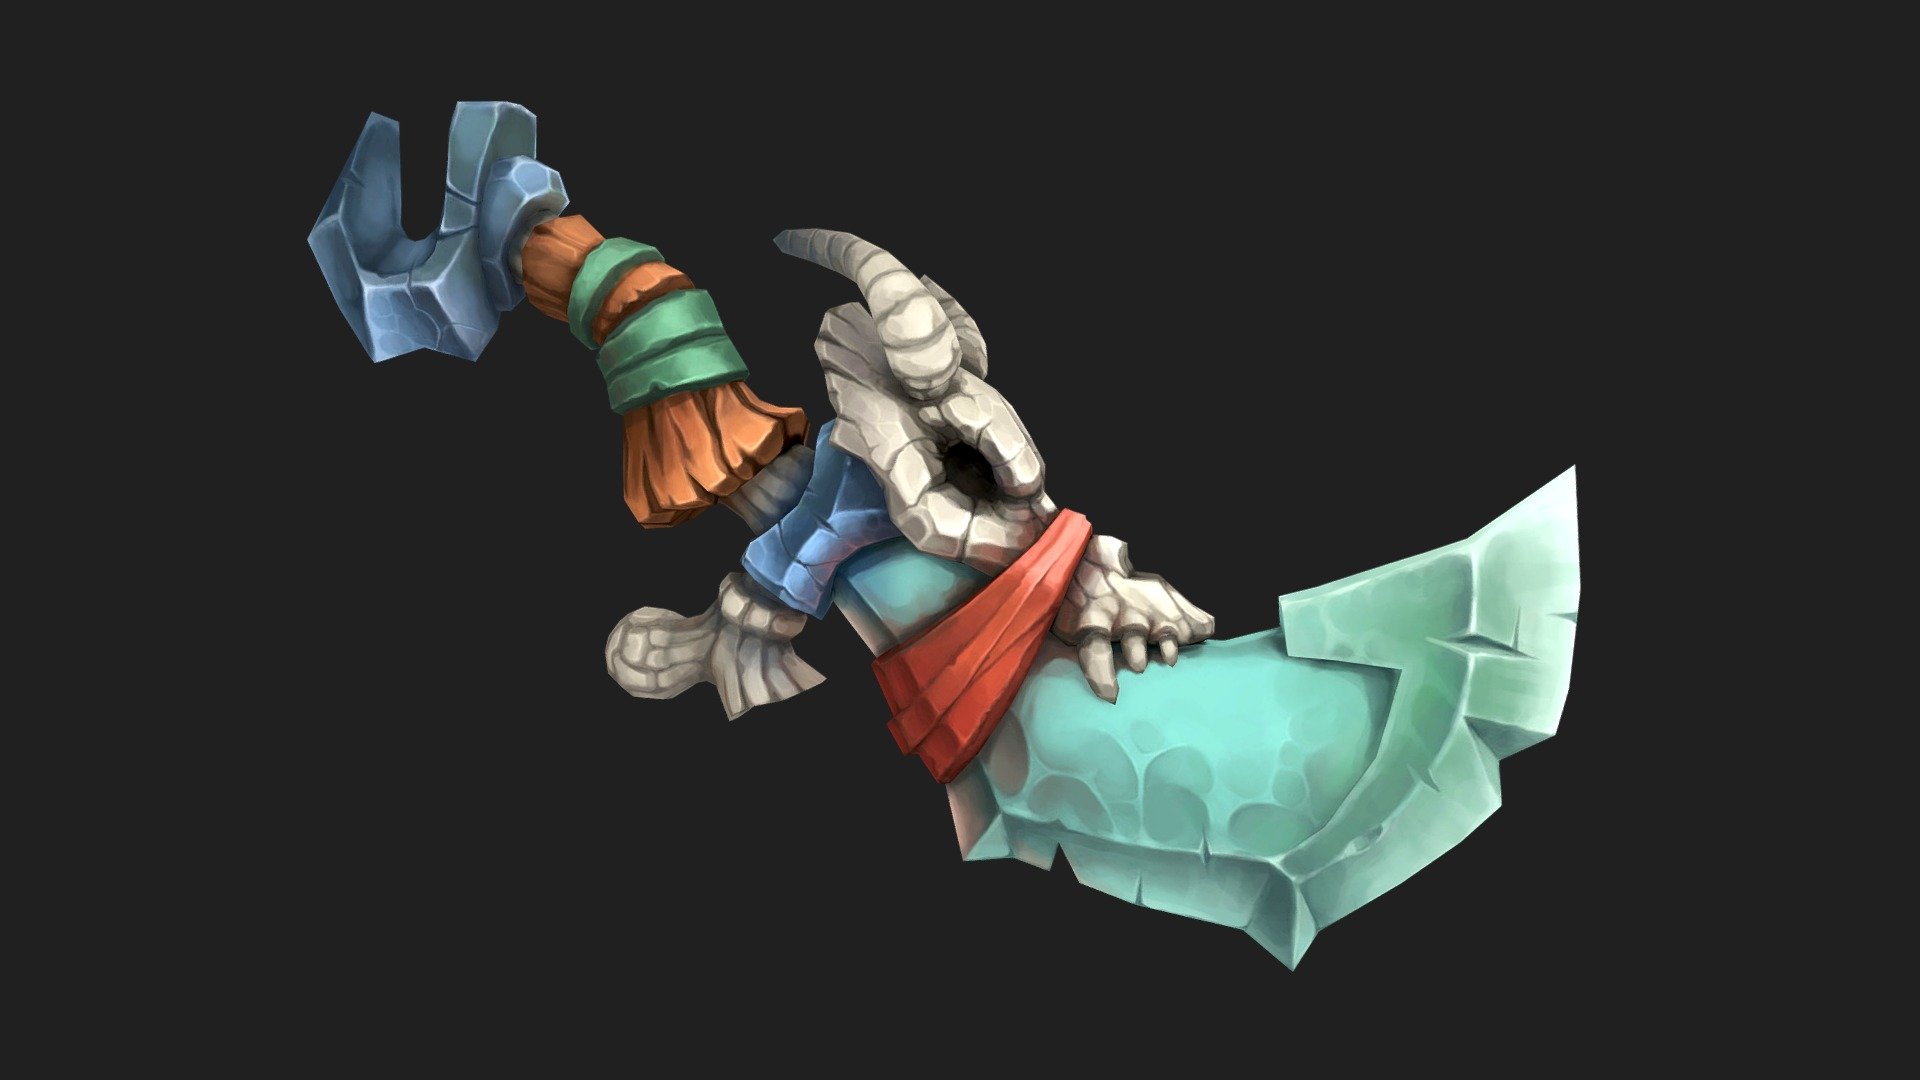 3D Necromancer Knife.
https://www.artstation.com/artwork/28am1B
Low poly/ Hand painted.
Texture with a resolution of 1024x1024 - Necromancer Kniife - Buy Royalty Free 3D model by sashasasha 3d model